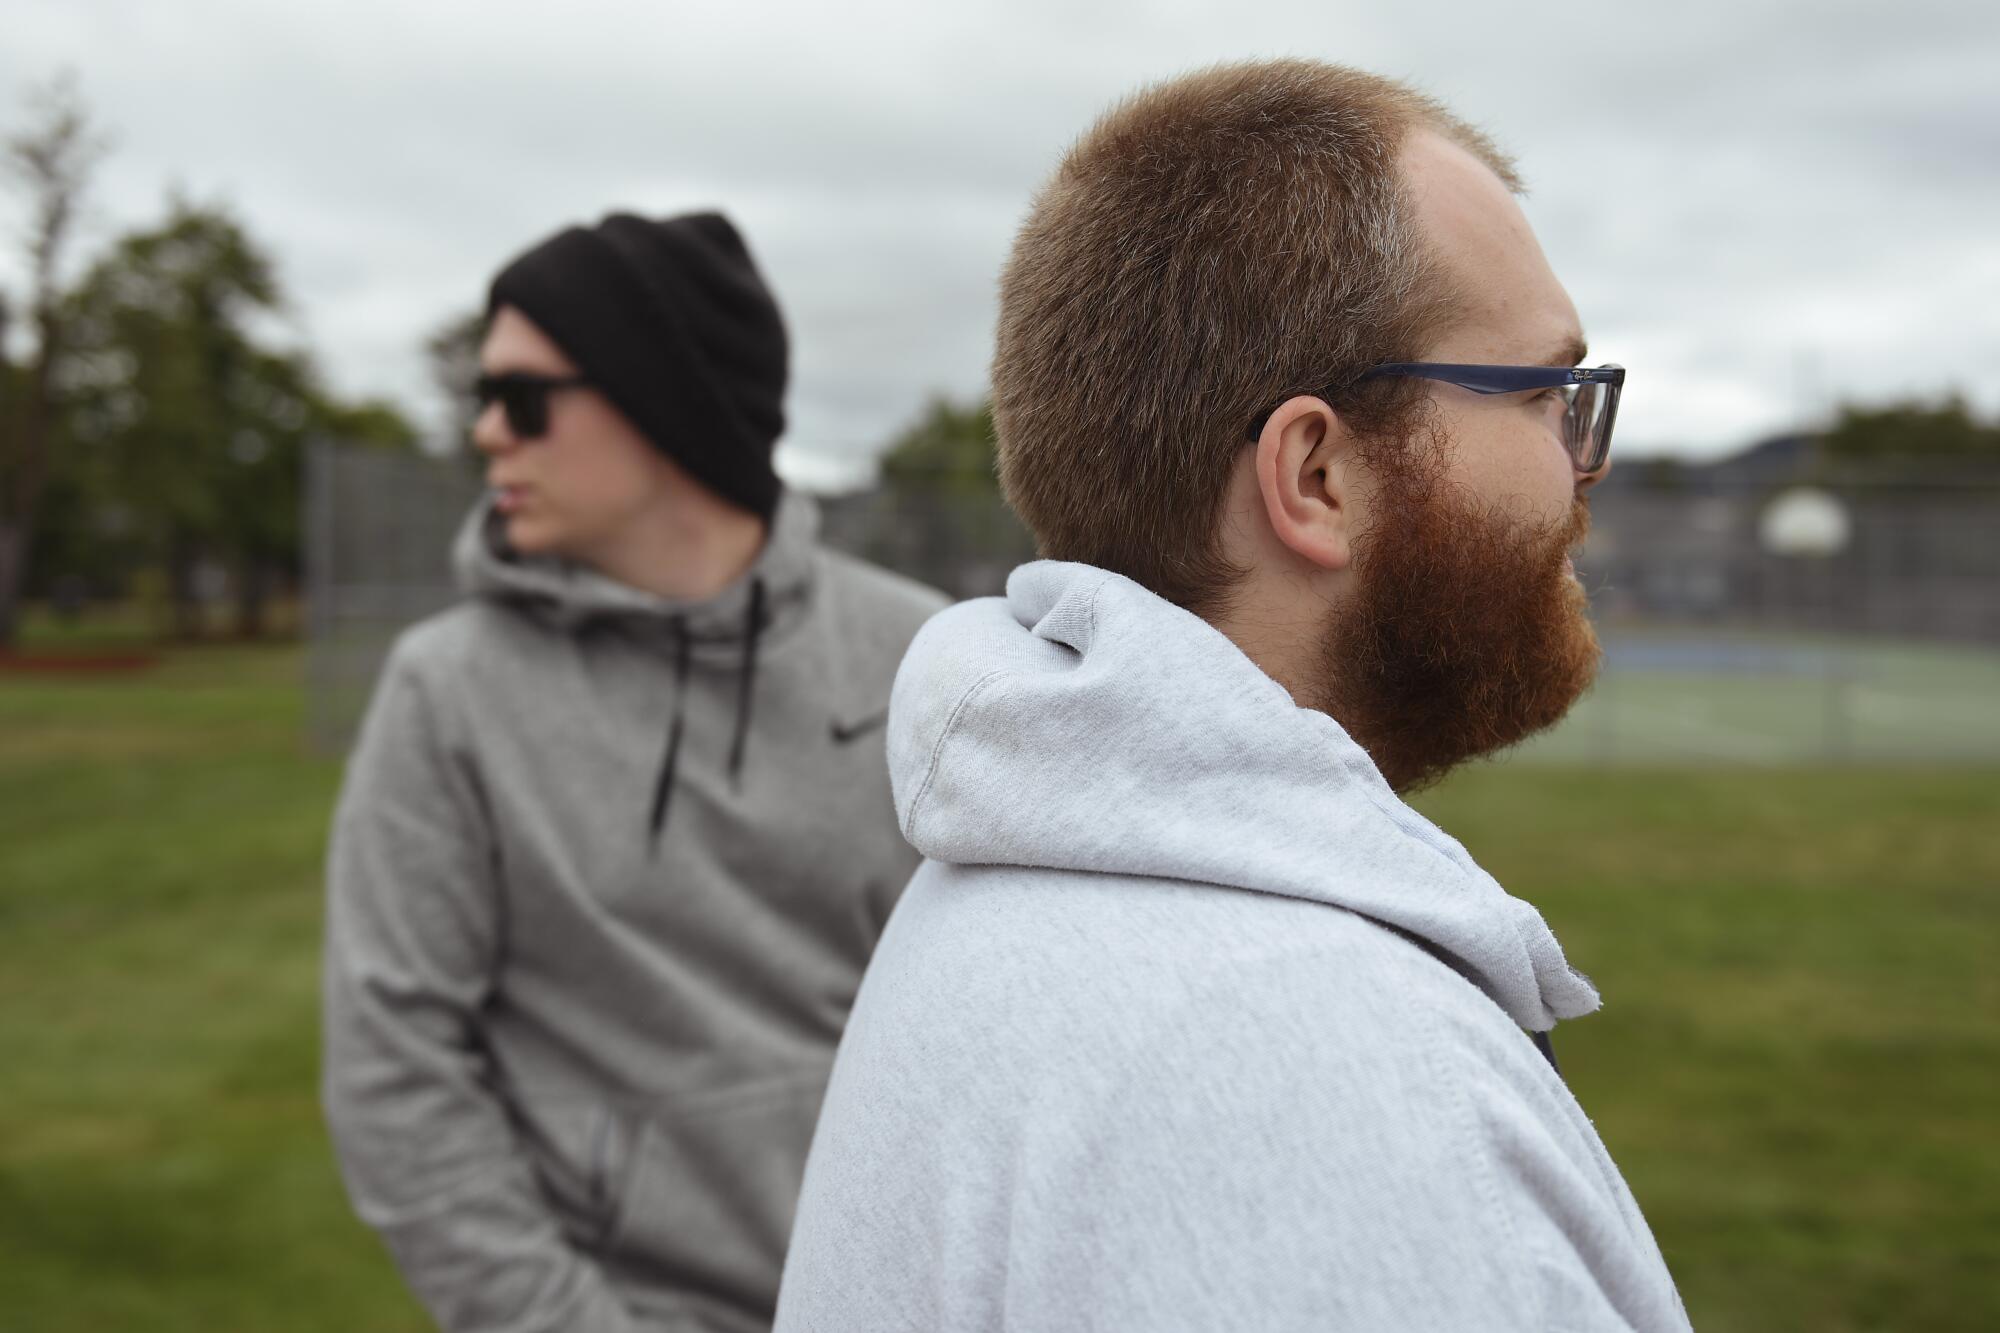 Nick and Jarred Lange stand in a grassy outdoor area.